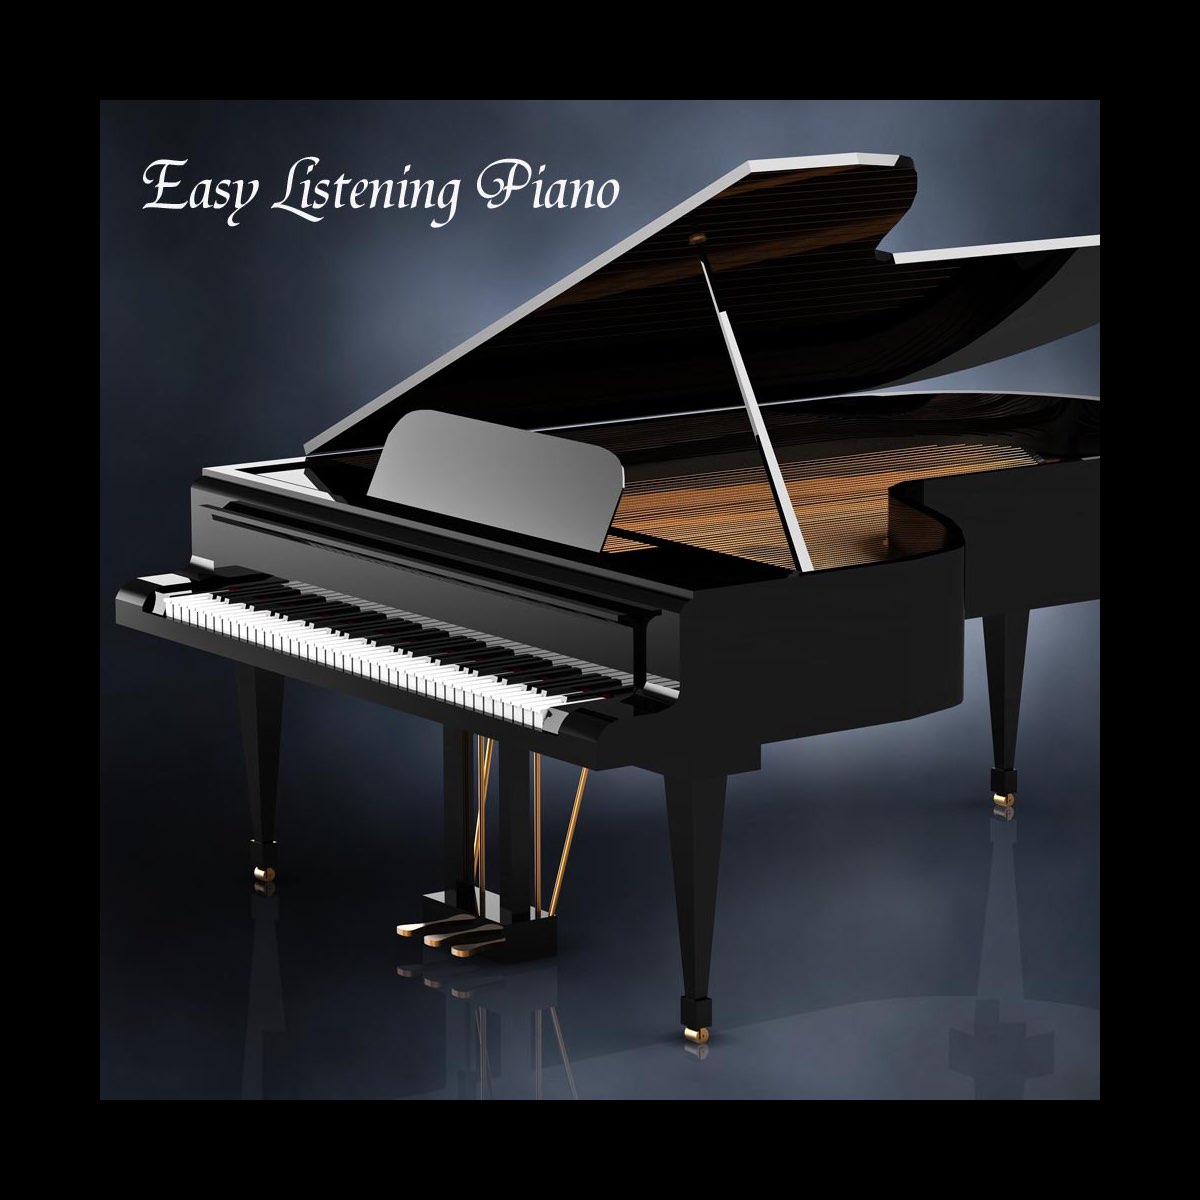 Easy Listening Piano: Background Music, Piano Music and Soft Songs  (Instrumentals) - Album by Easy Listening Piano - Apple Music